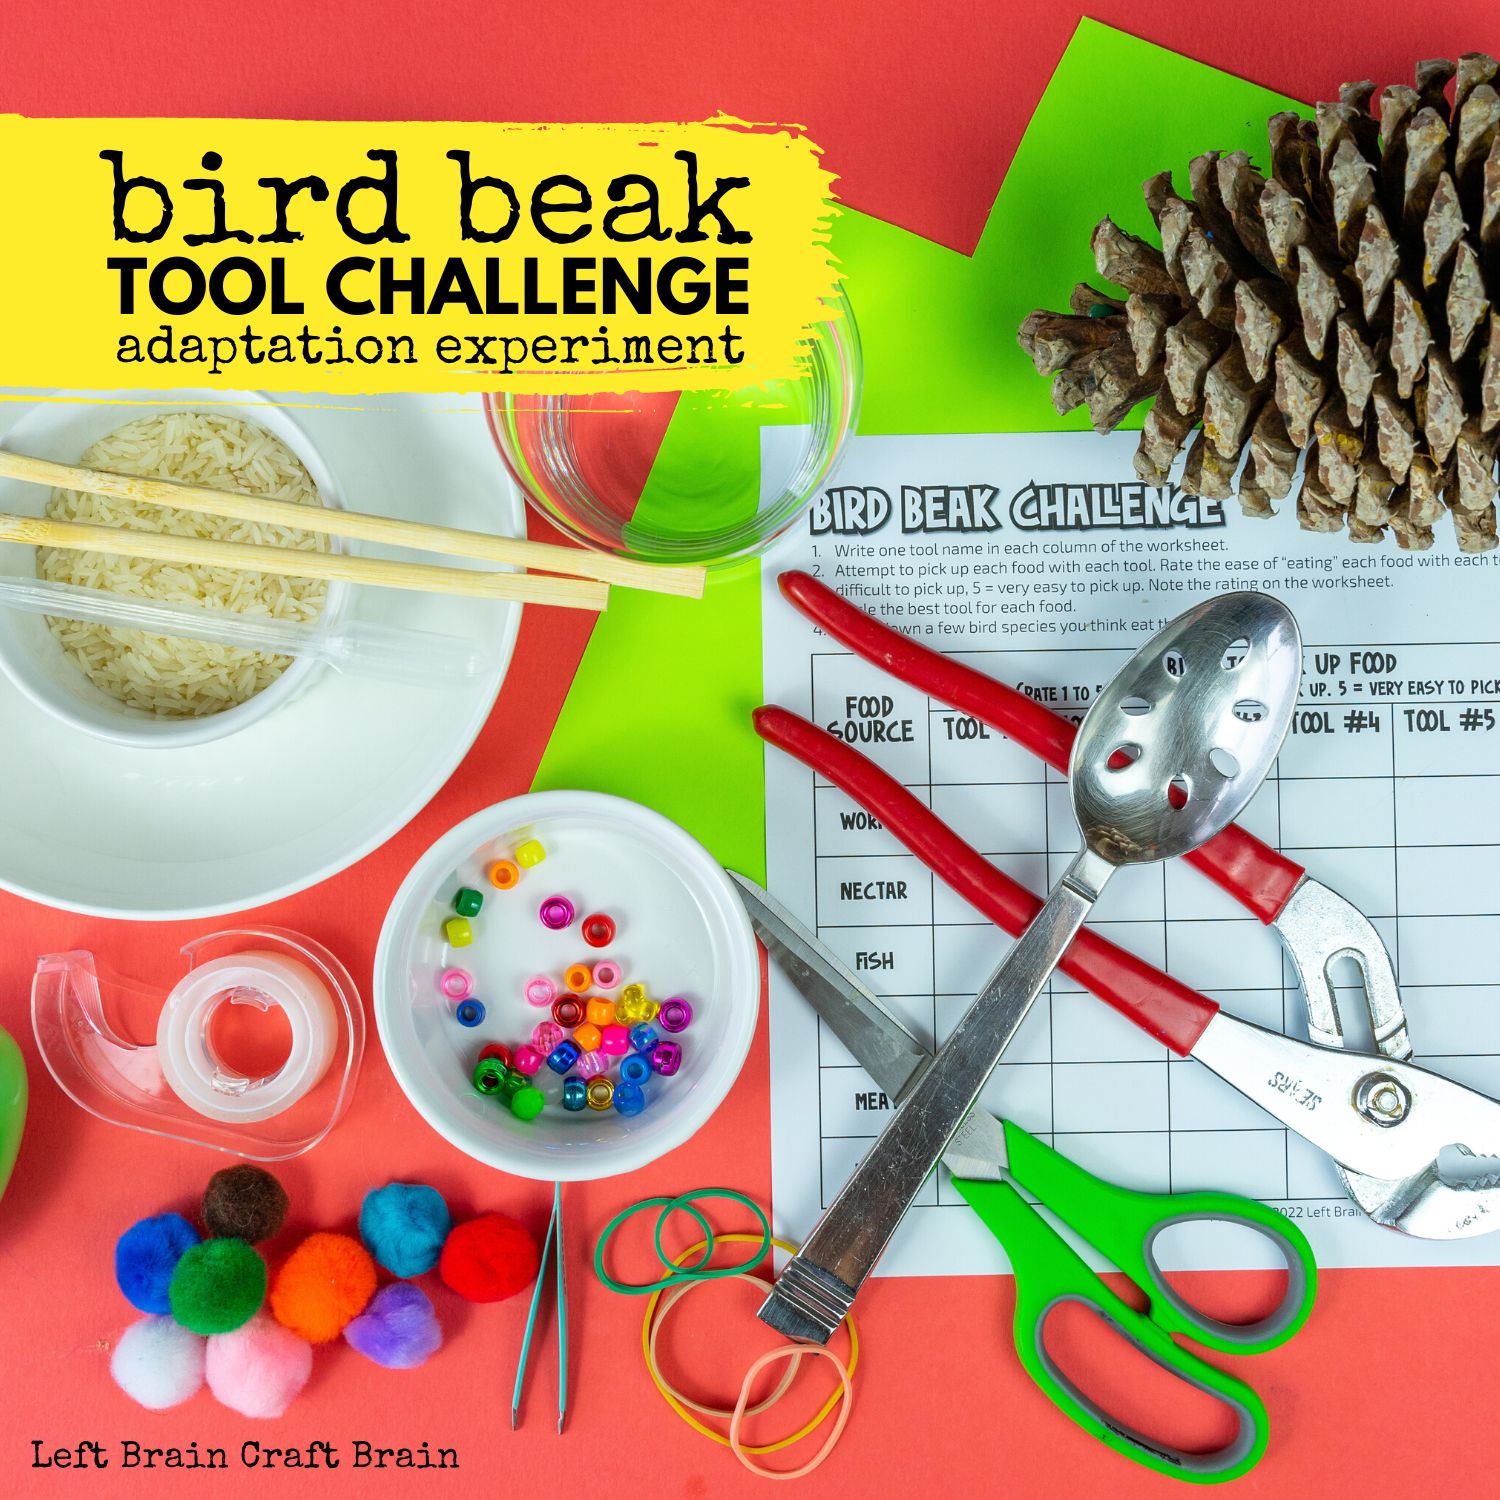 Learn how animals adapt to their environment with this hands-on Bird Beak Tool Challenge adaptation experiment.